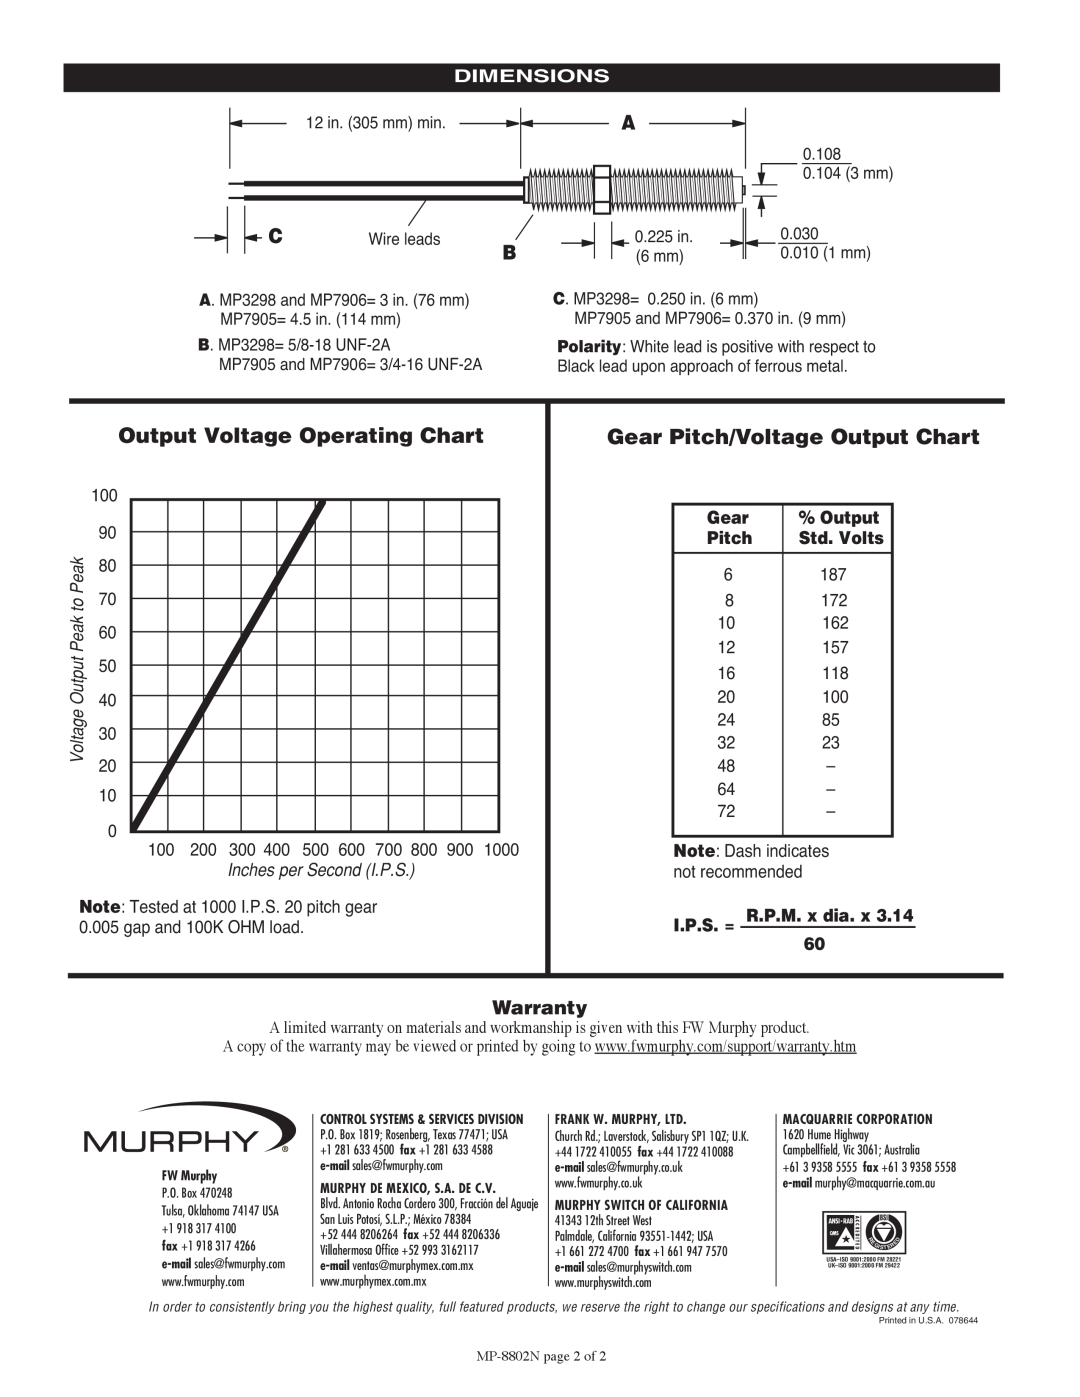 Murphy MP-8802N, MP3298 Output Voltage Operating Chart, Gear Pitch/Voltage Output Chart, Warranty, Dimensions, Wire leads 